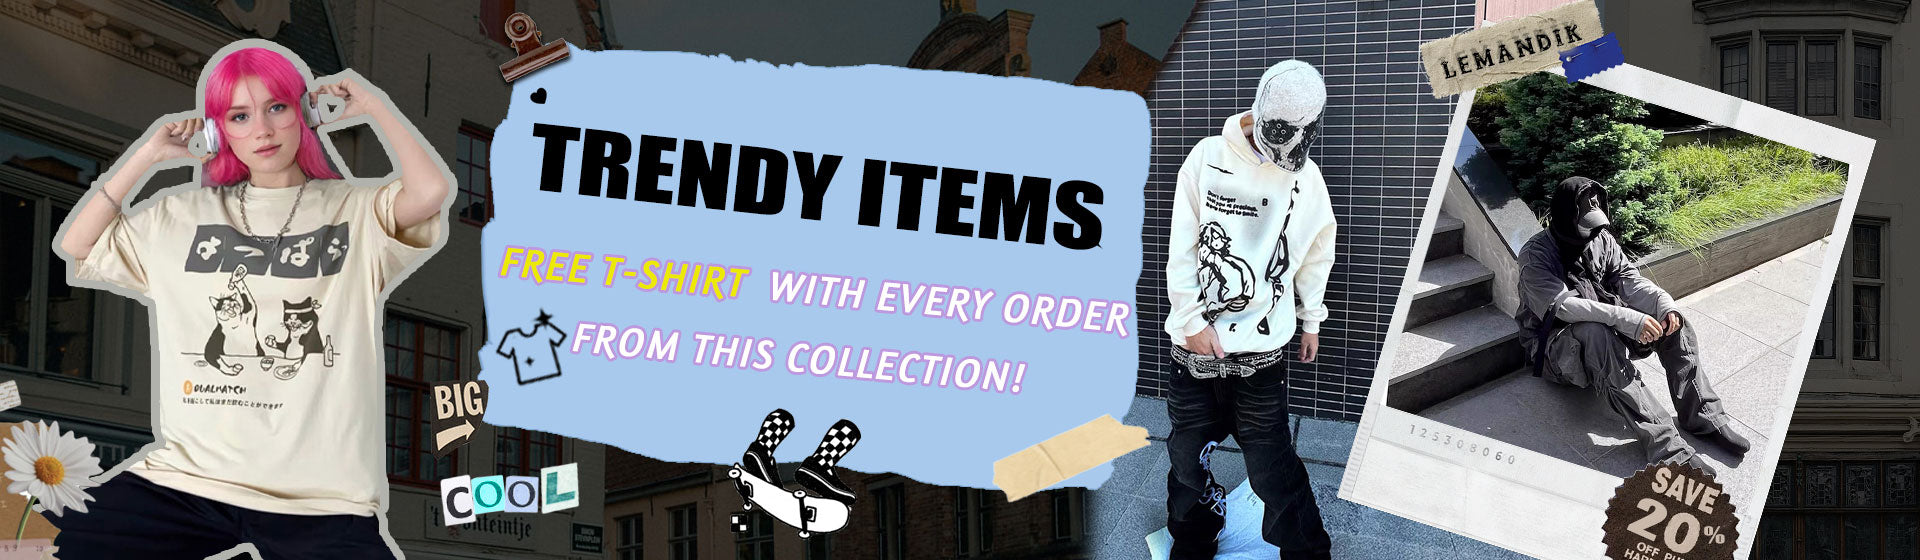 trendy items special offer